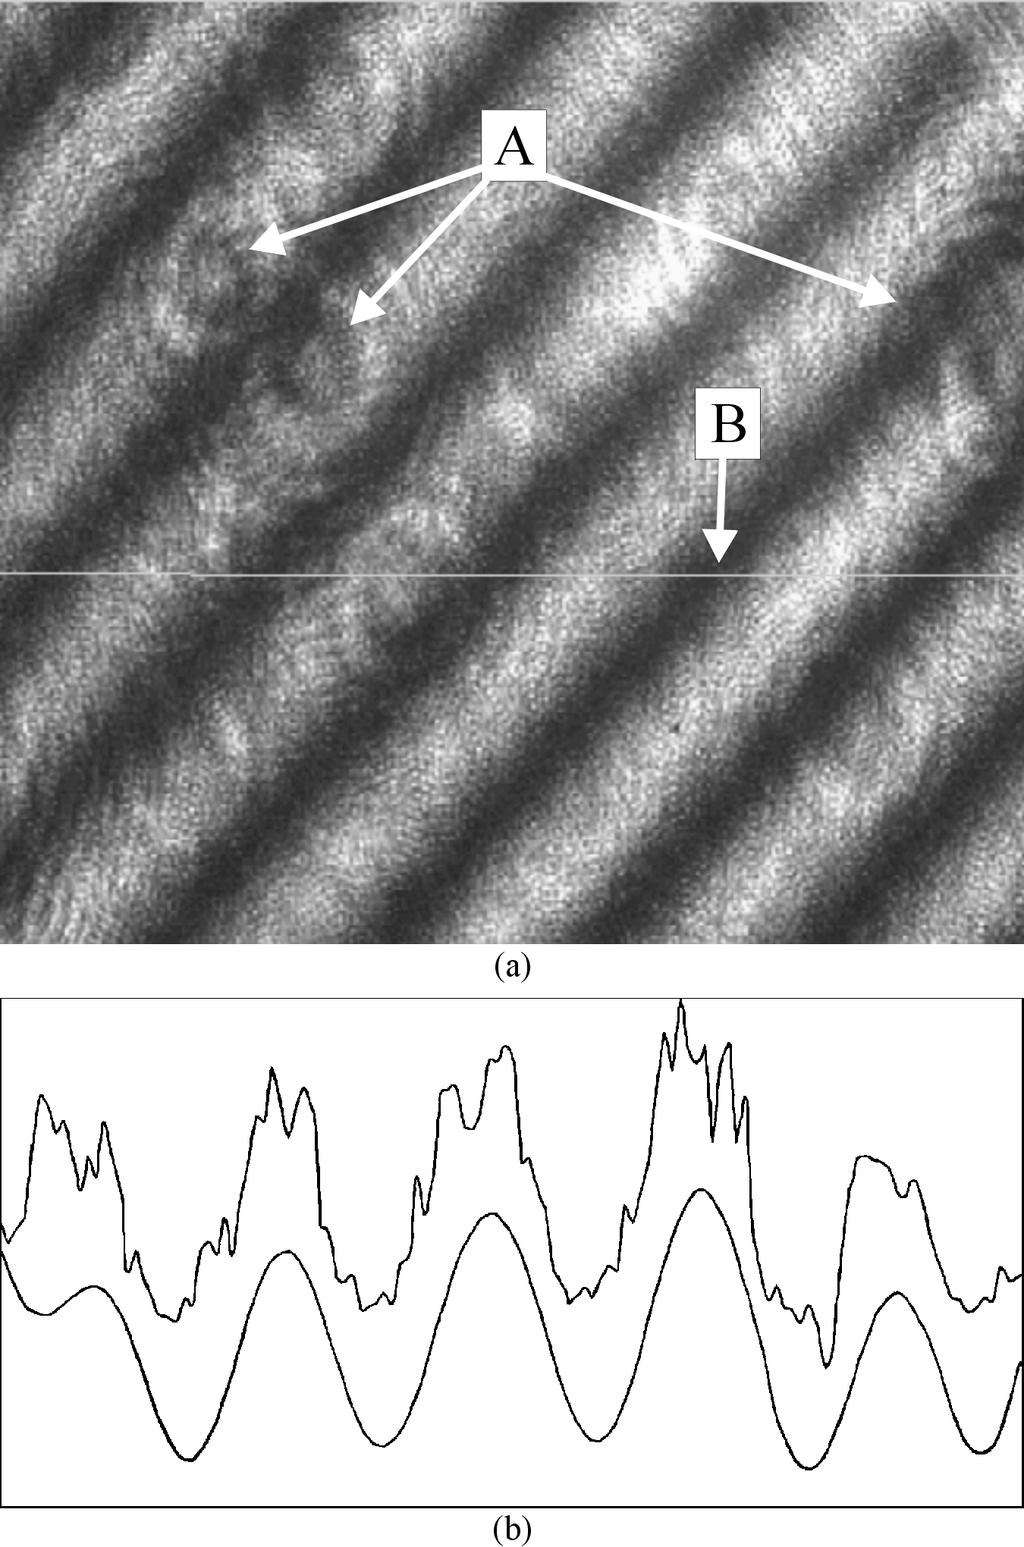 Figure 2. Video frame and spatial intensity data. (a) Full frame of acquired interference pattern acquired from CCD camera. Points A show typical fixed spatial intensity noise.